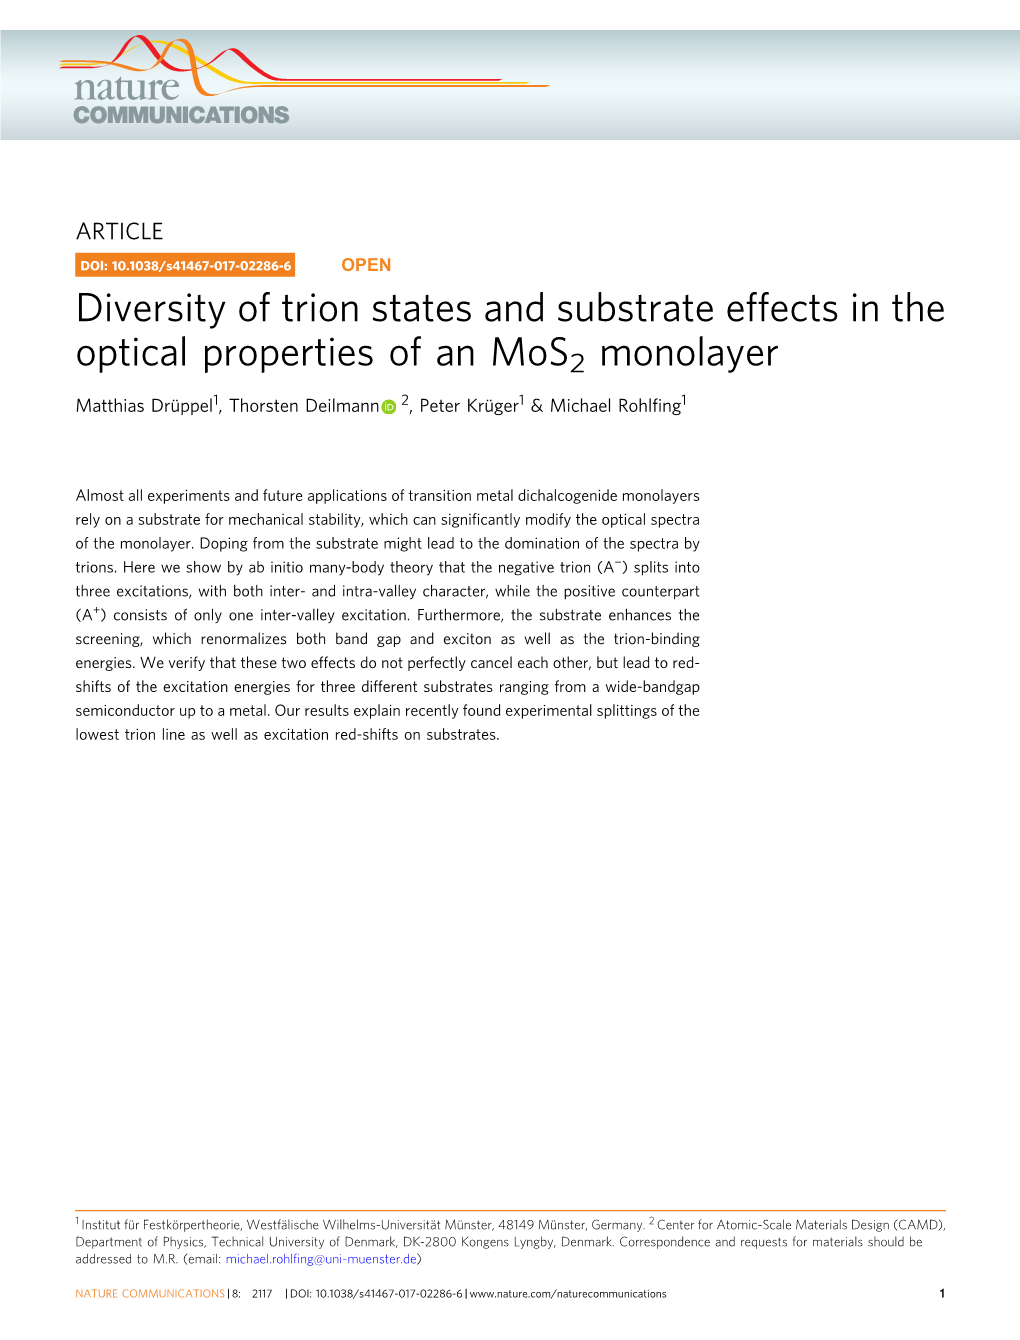 Diversity of Trion States and Substrate Effects in the Optical Properties of an Mos2 Monolayer